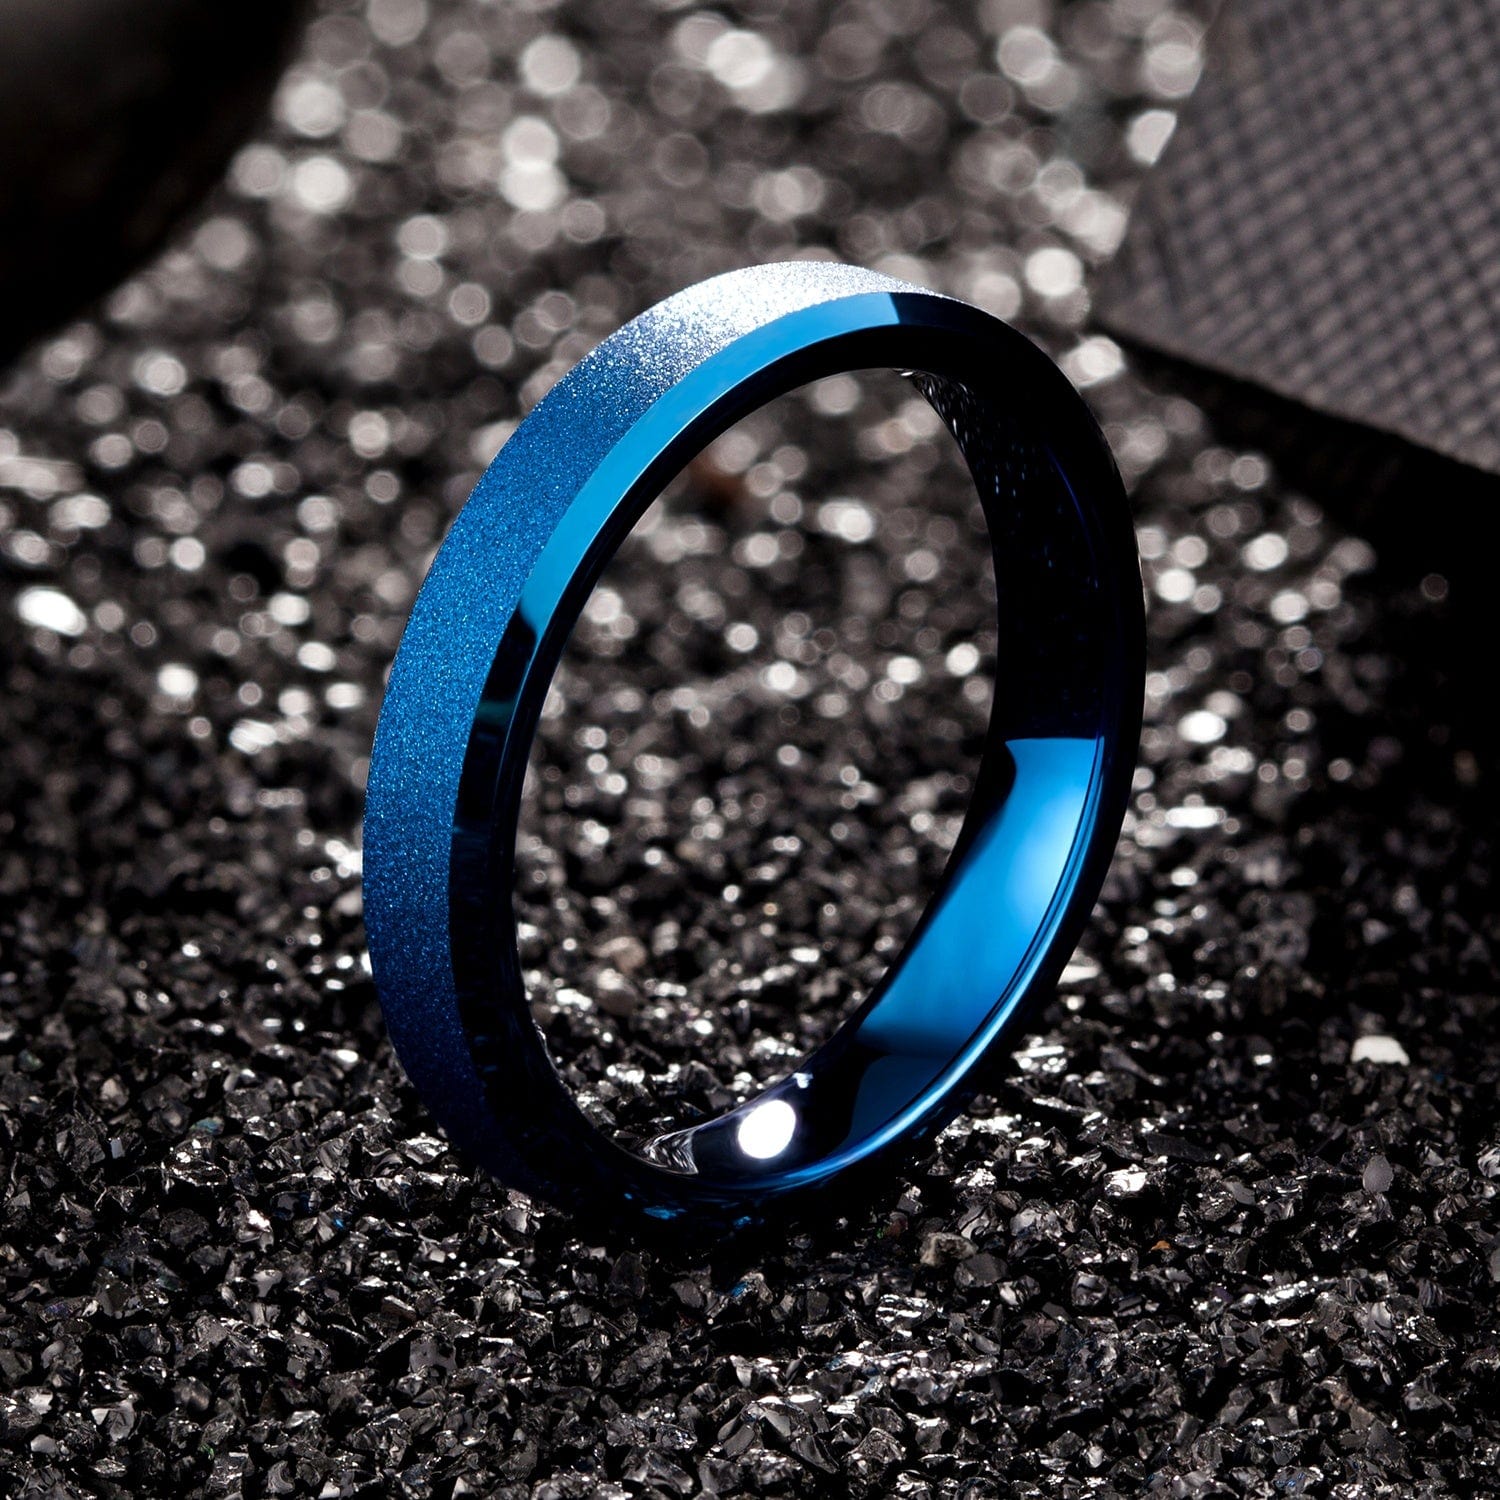 Back the Blue FUNDRAISER! Thin Blue Line Tungsten Steel Rings-4 types! - The Pink Pigs, A Compassionate Boutique